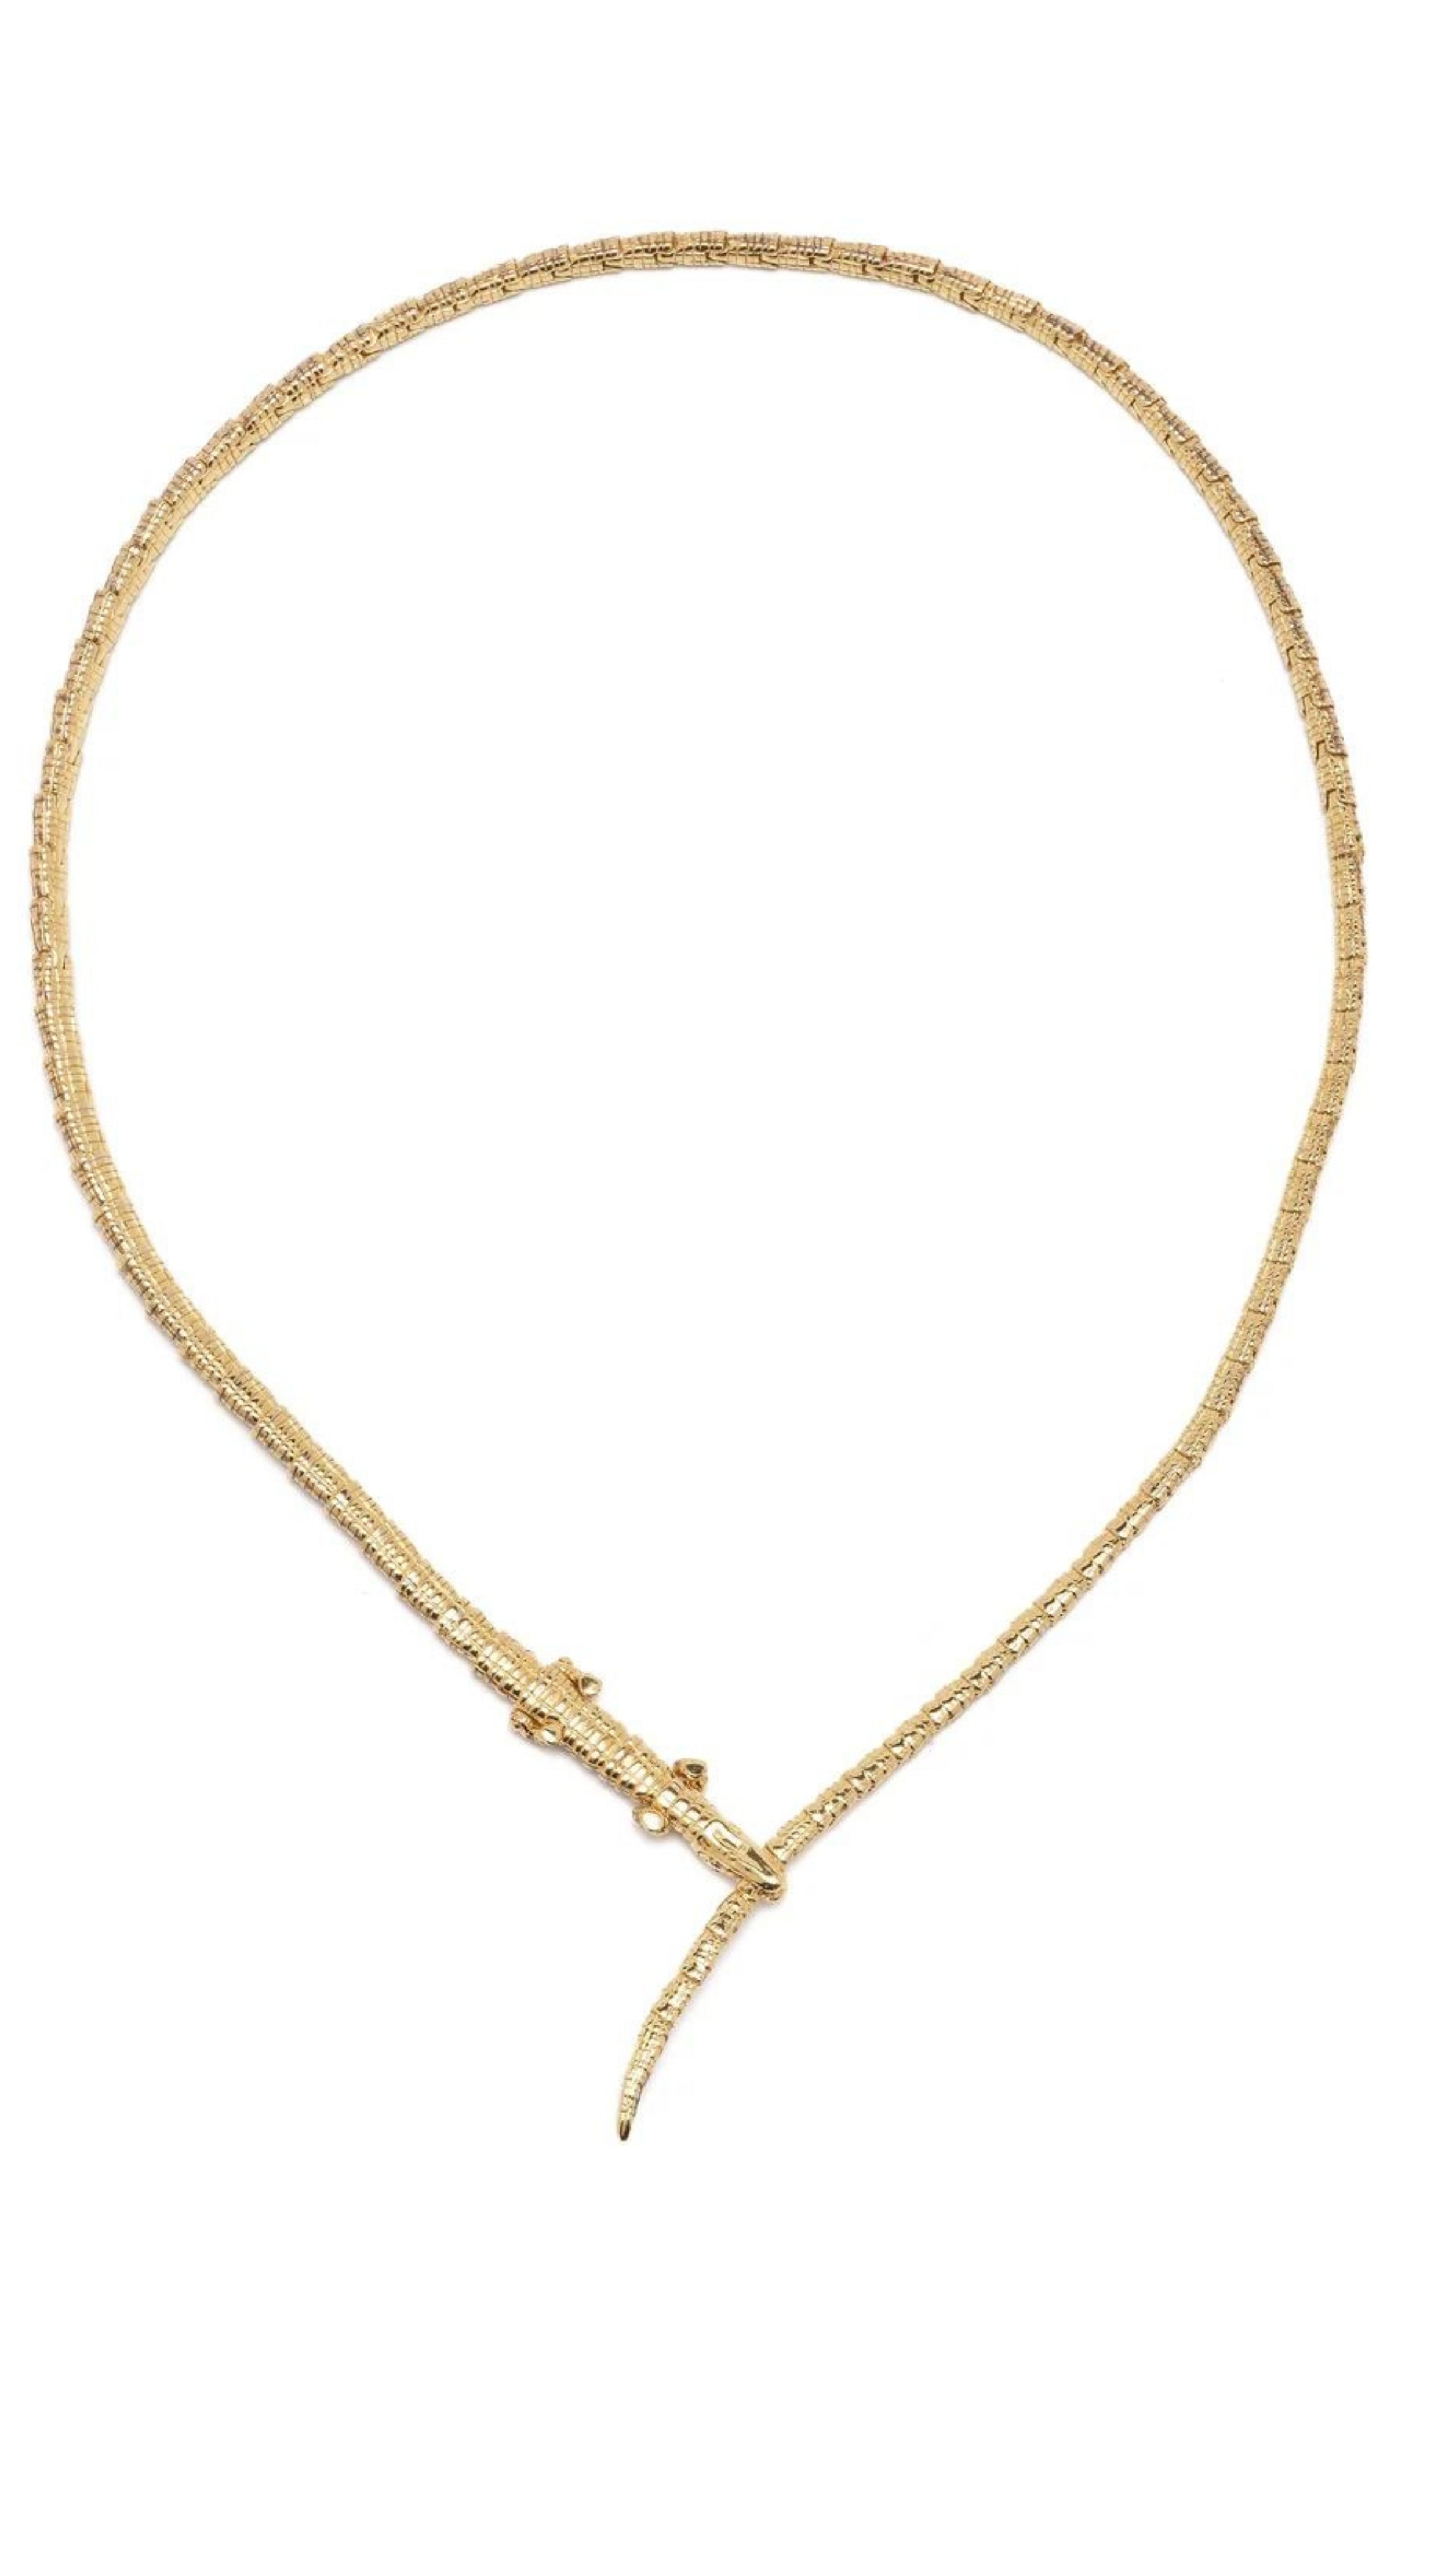 Bibi van der Velden The Alligator Wrap Thin Necklace made from 18k yellow gold in the shape of body of an alligator. Its elongated tail serves as the necklace&#39;s length and features a closure of the alligator&#39;s jaws snapping down on its own tail in the front. This necklace has  tsavorite eyes and moving feet. Shown on from the top